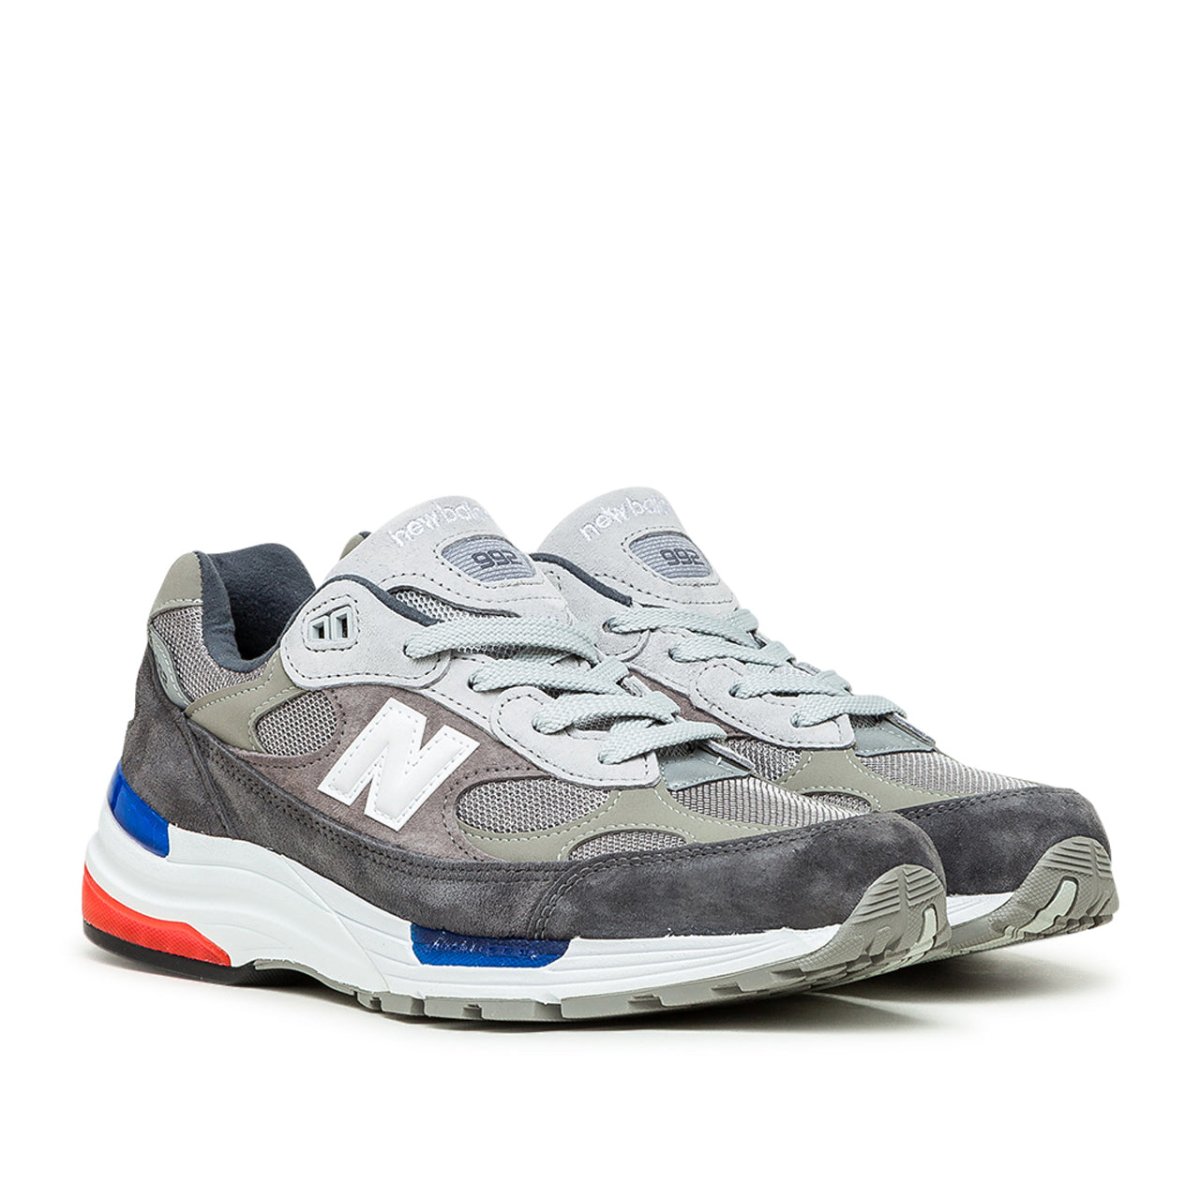 New Balance M992 AG 'Made in USA' (Grey / Blue / Red)